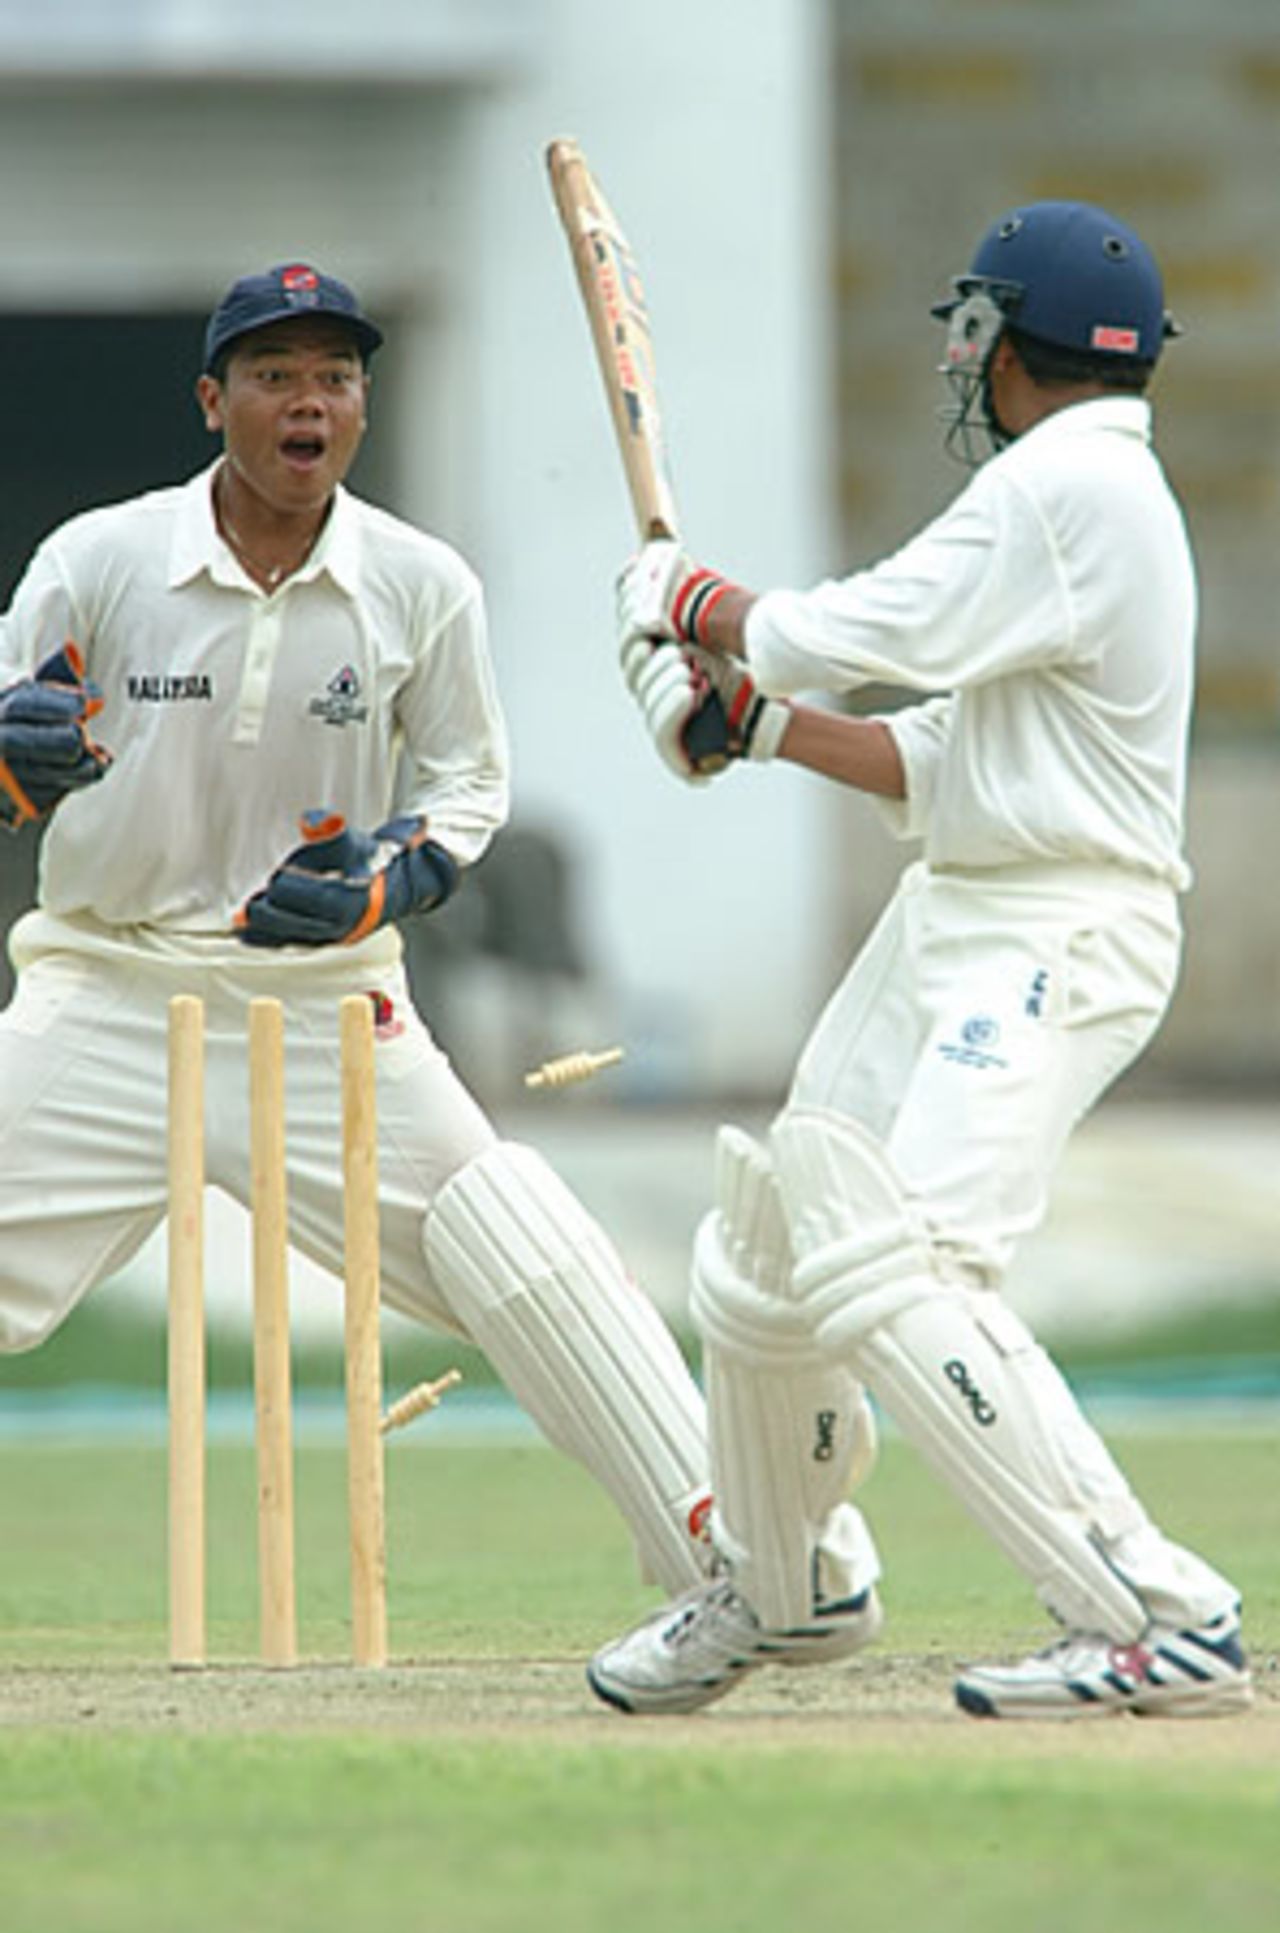 Thailand's Nishadh Thomas loses his bails, Malaysia Under-19s v Thailand Under-19s at National Stadium Karachi, Youth Asia Cup 2003, 23 July 2003.